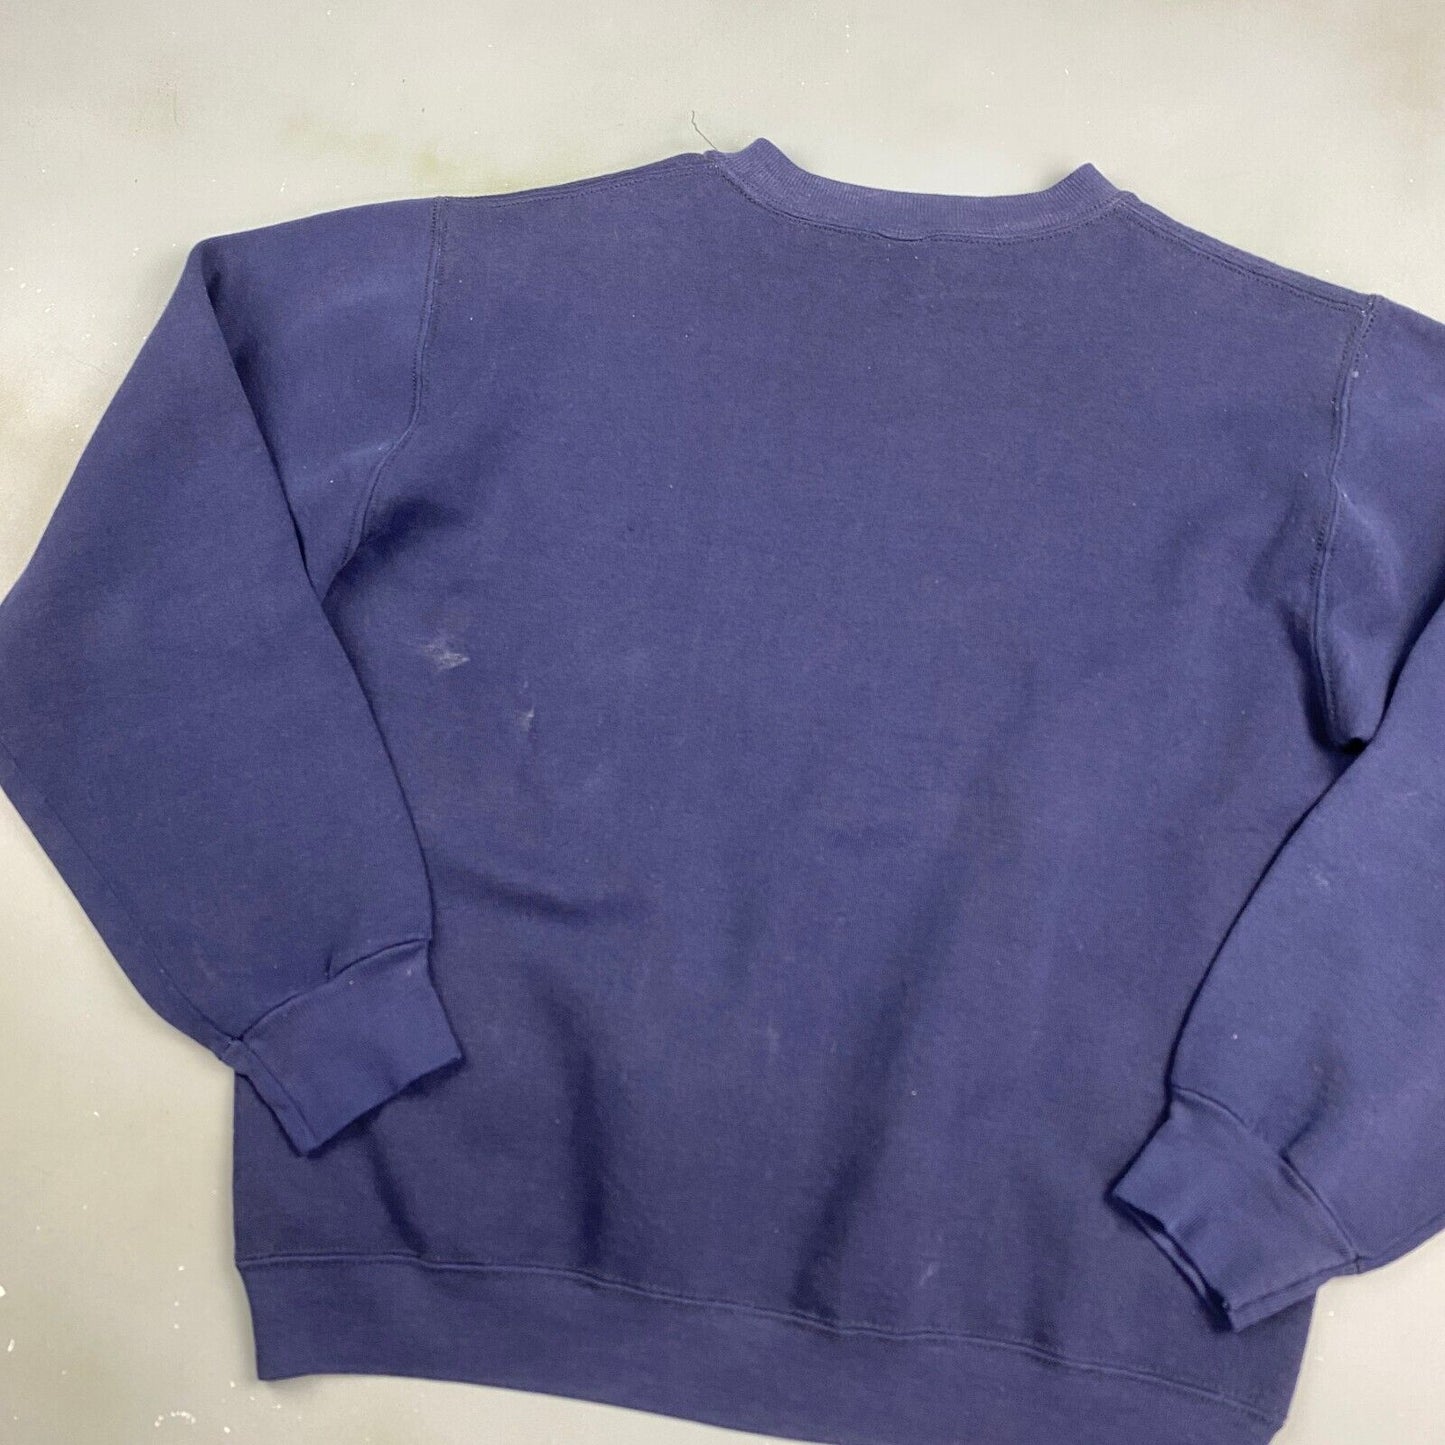 VINTAGE 90s Blank Navy Faded Russell Athletic Crewneck Sweater sz M Mens Adult